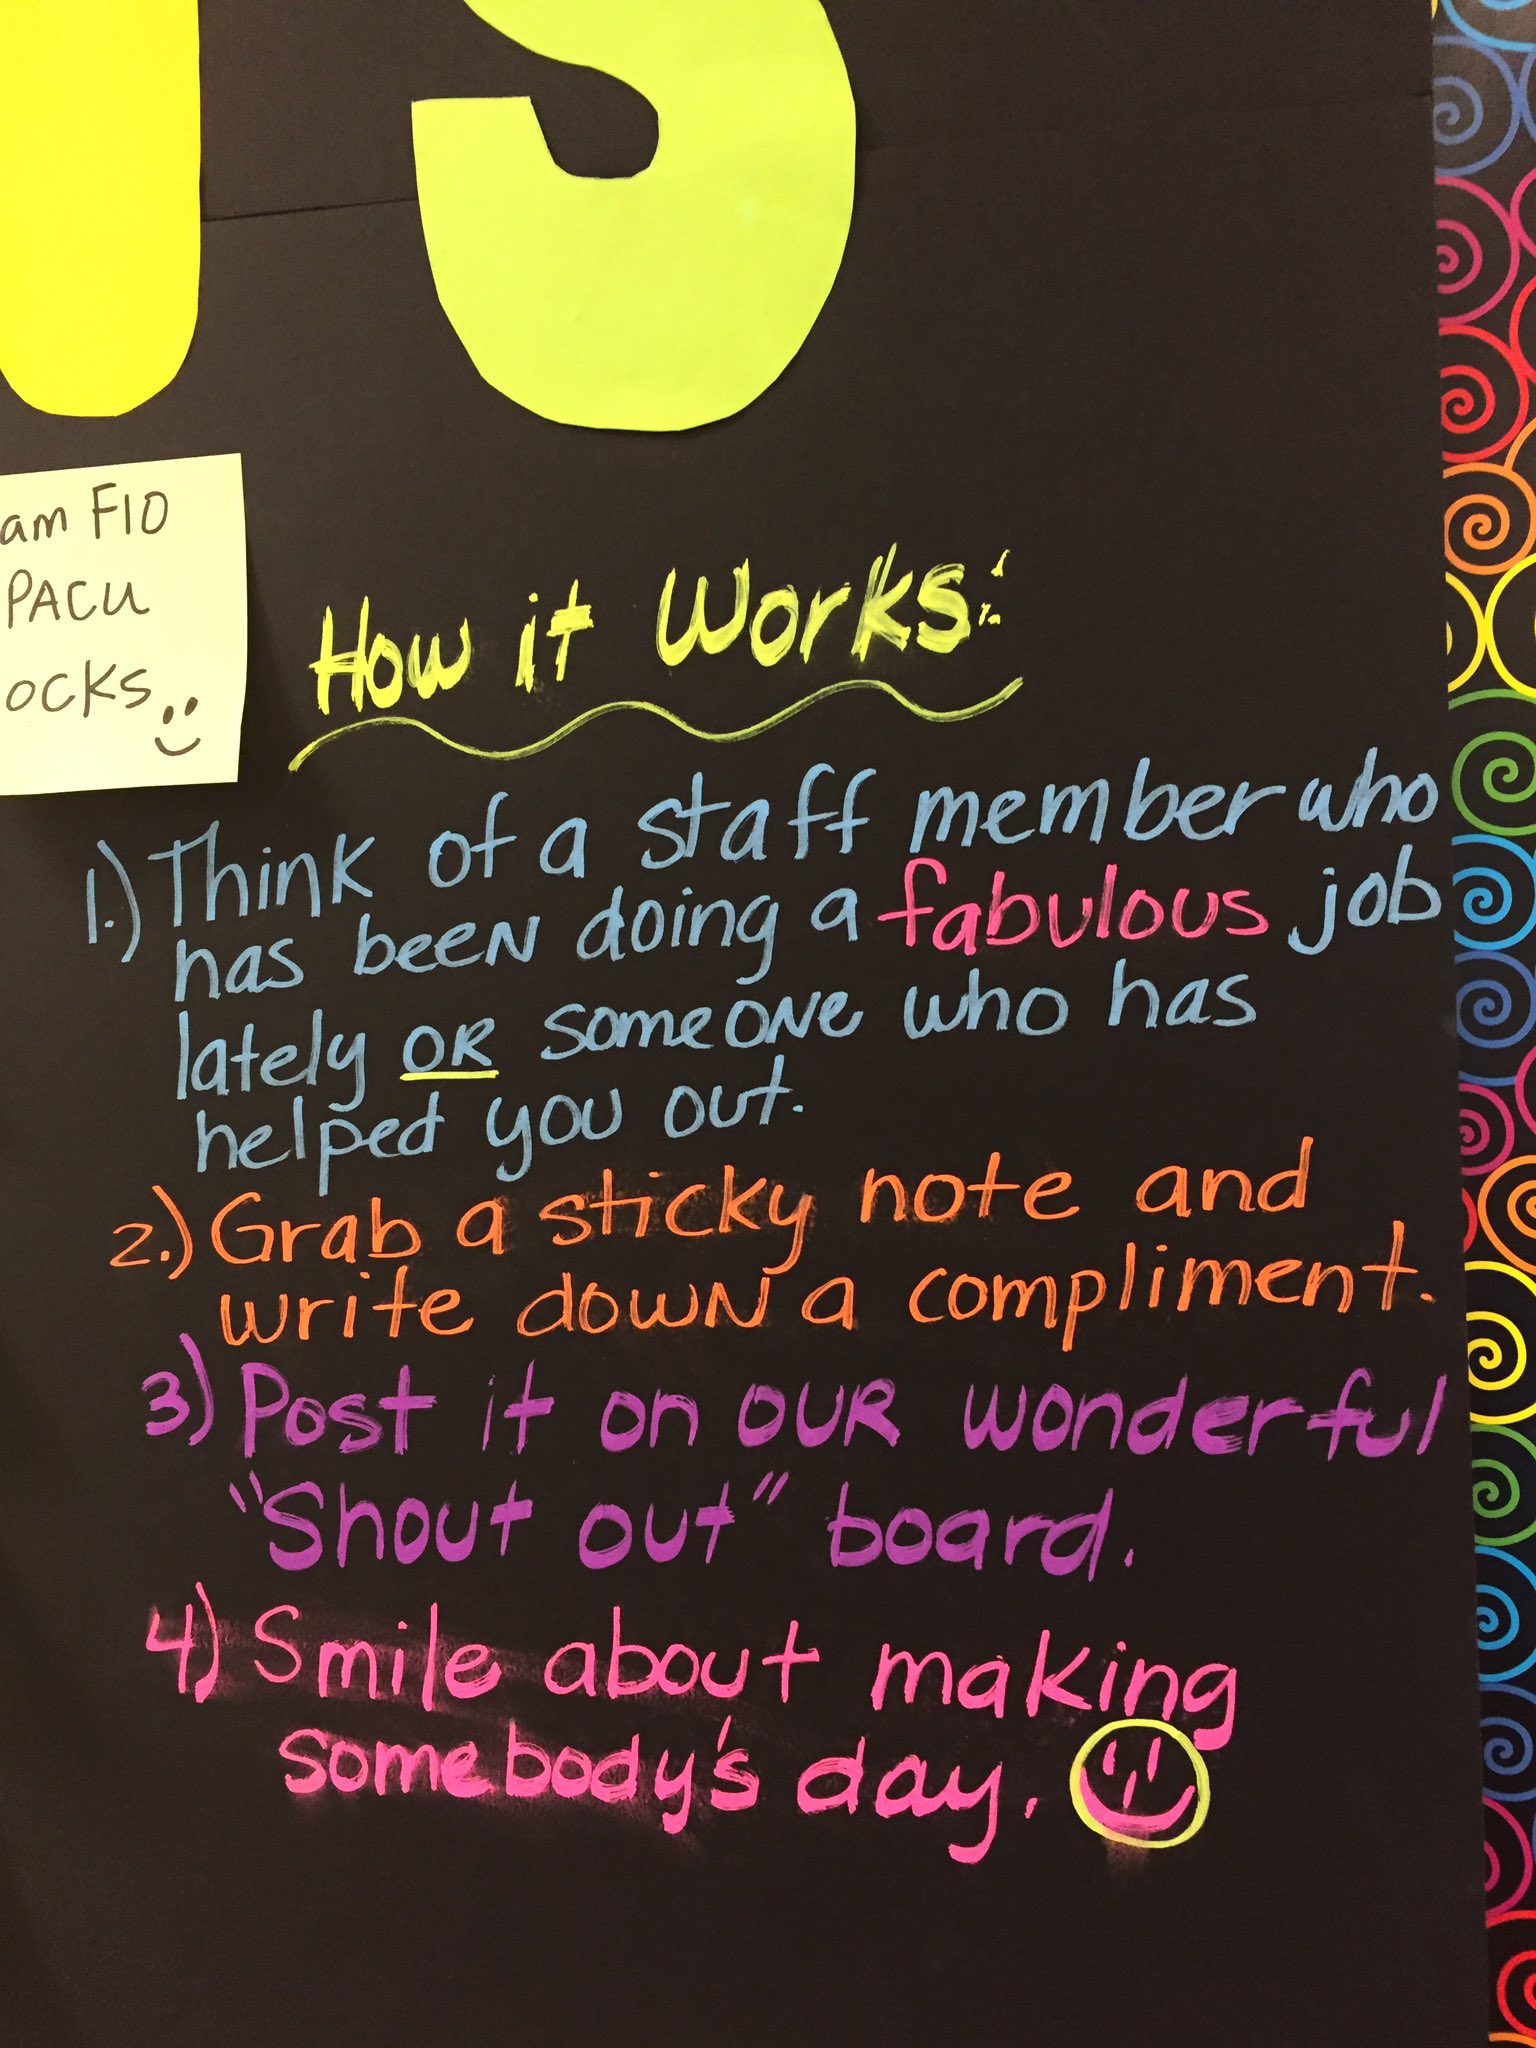 Stephanie Nolan on Twitter: "Love the Staff Shout Out Board on F10! #